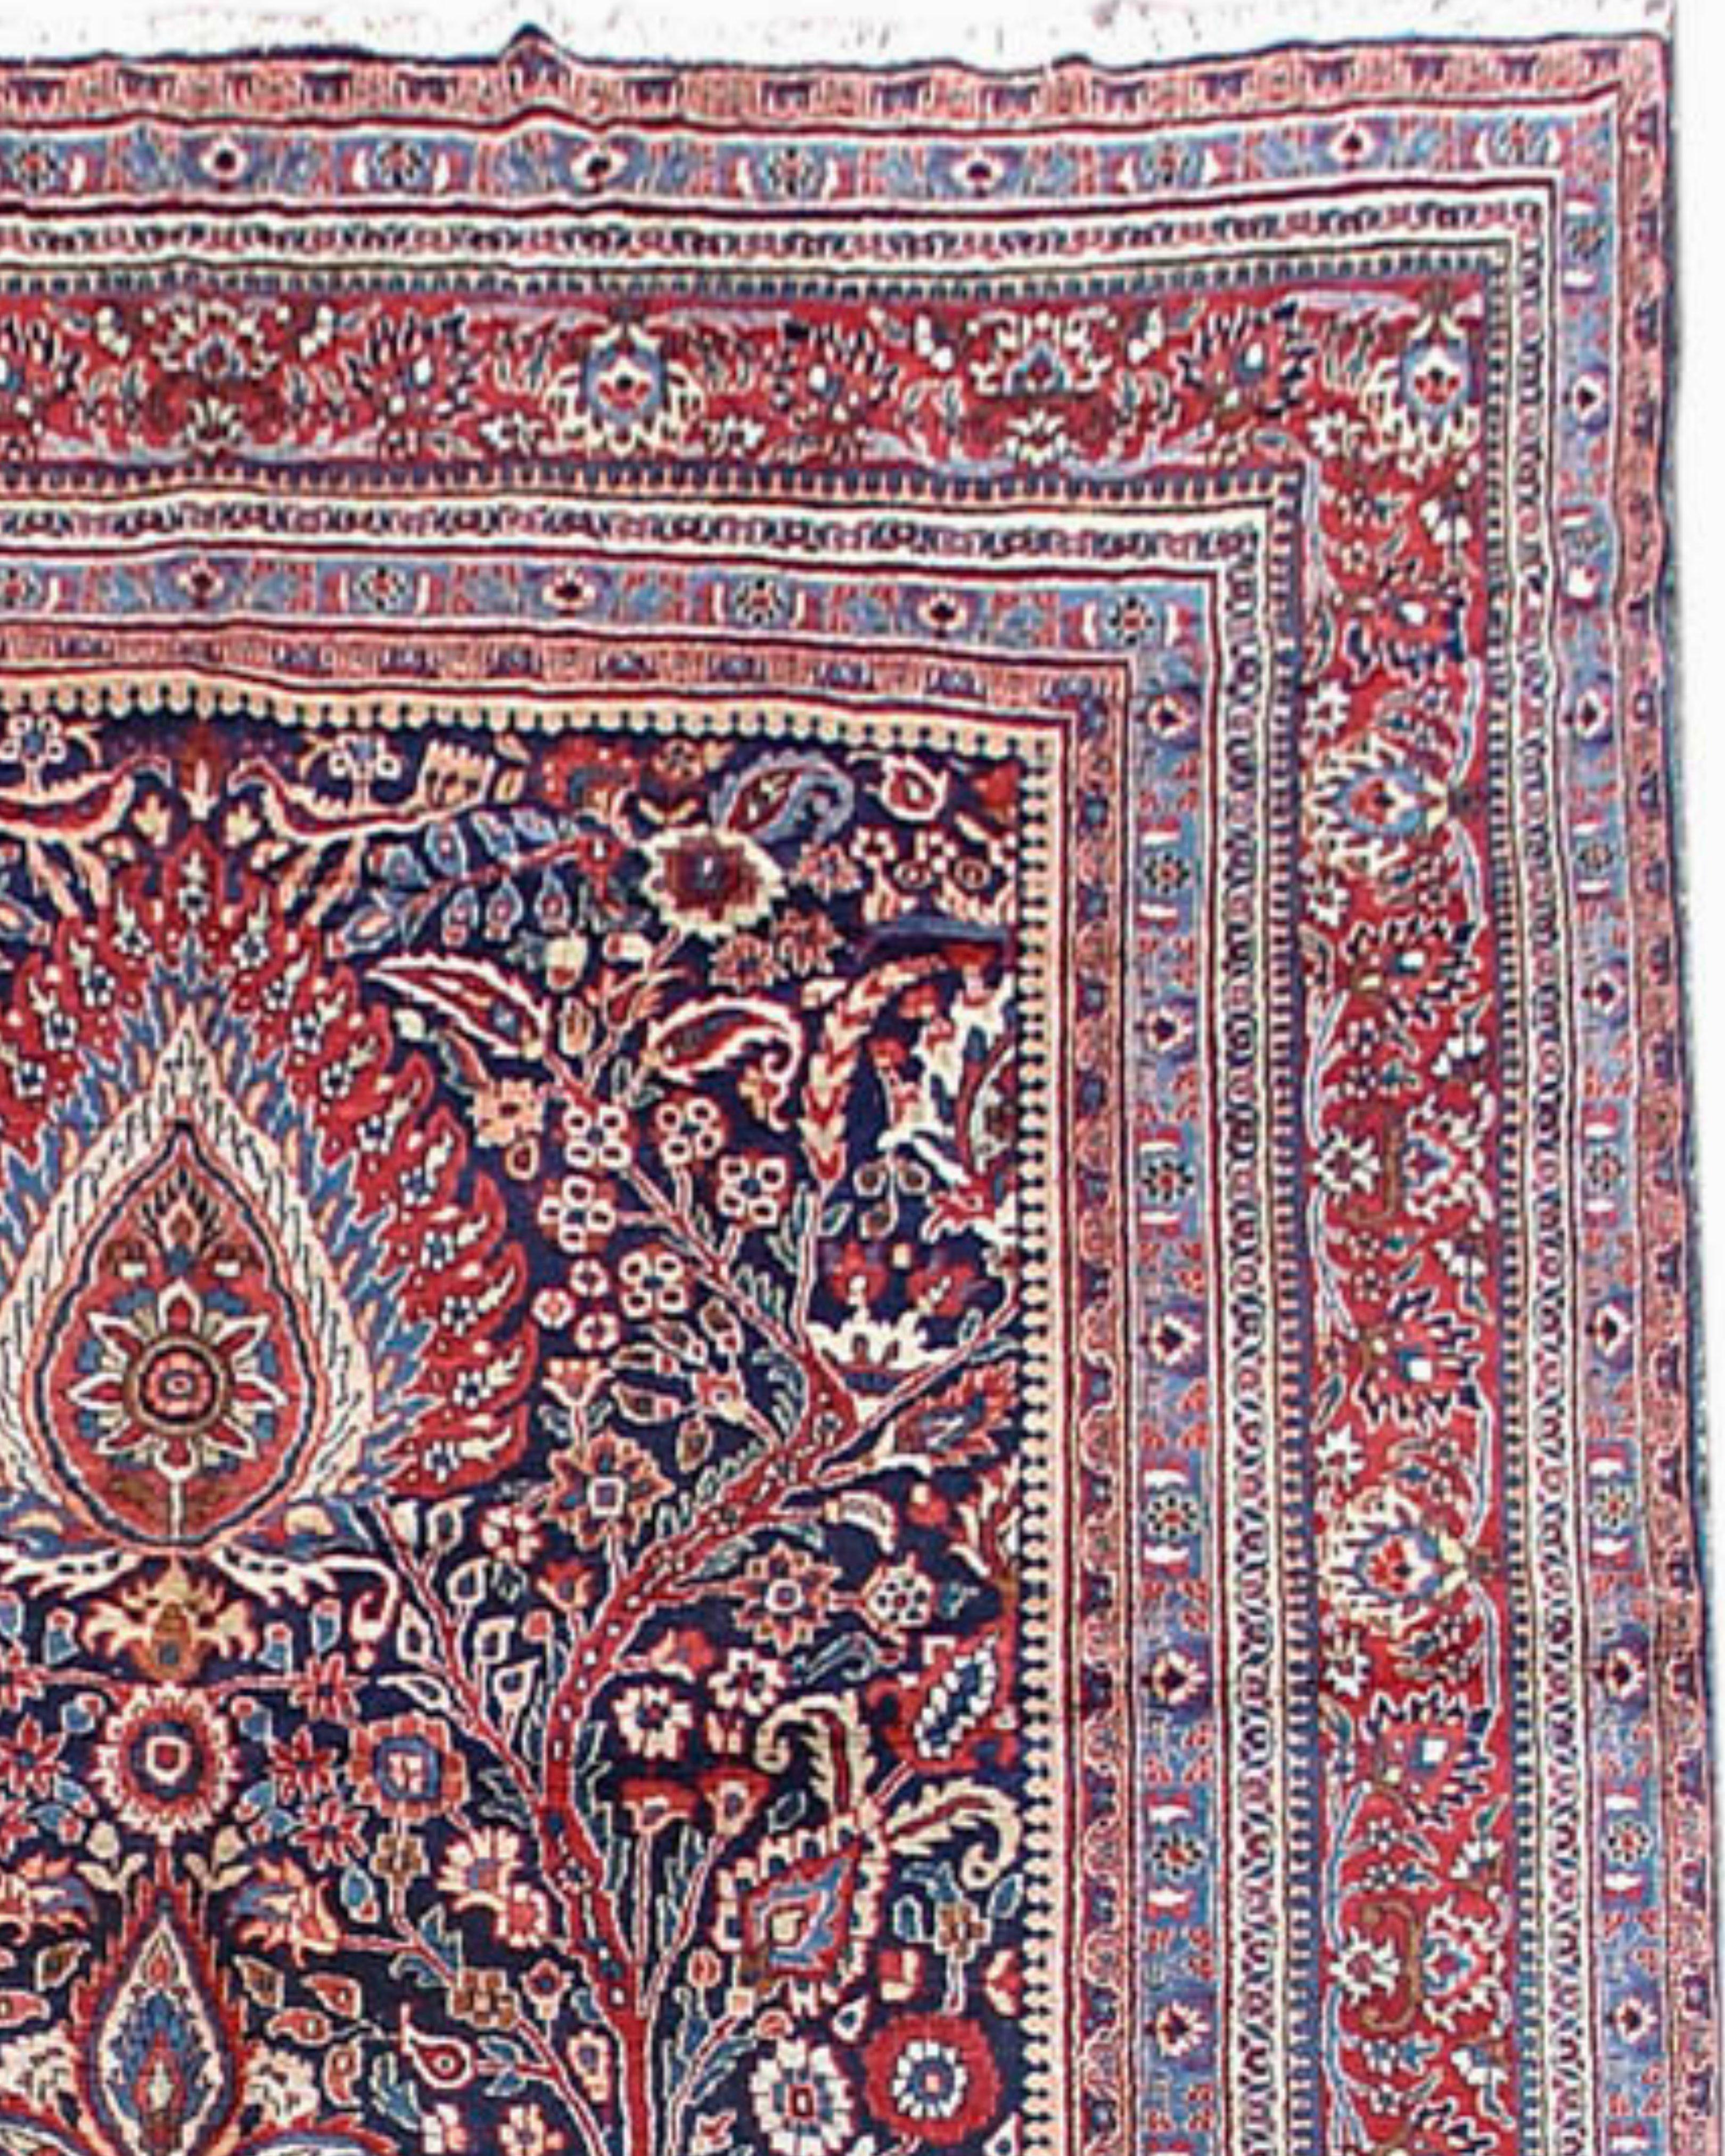 Antique Persian Mashad Rug, Mid-20th Century

Additional Information:
Dimensions: 9'3